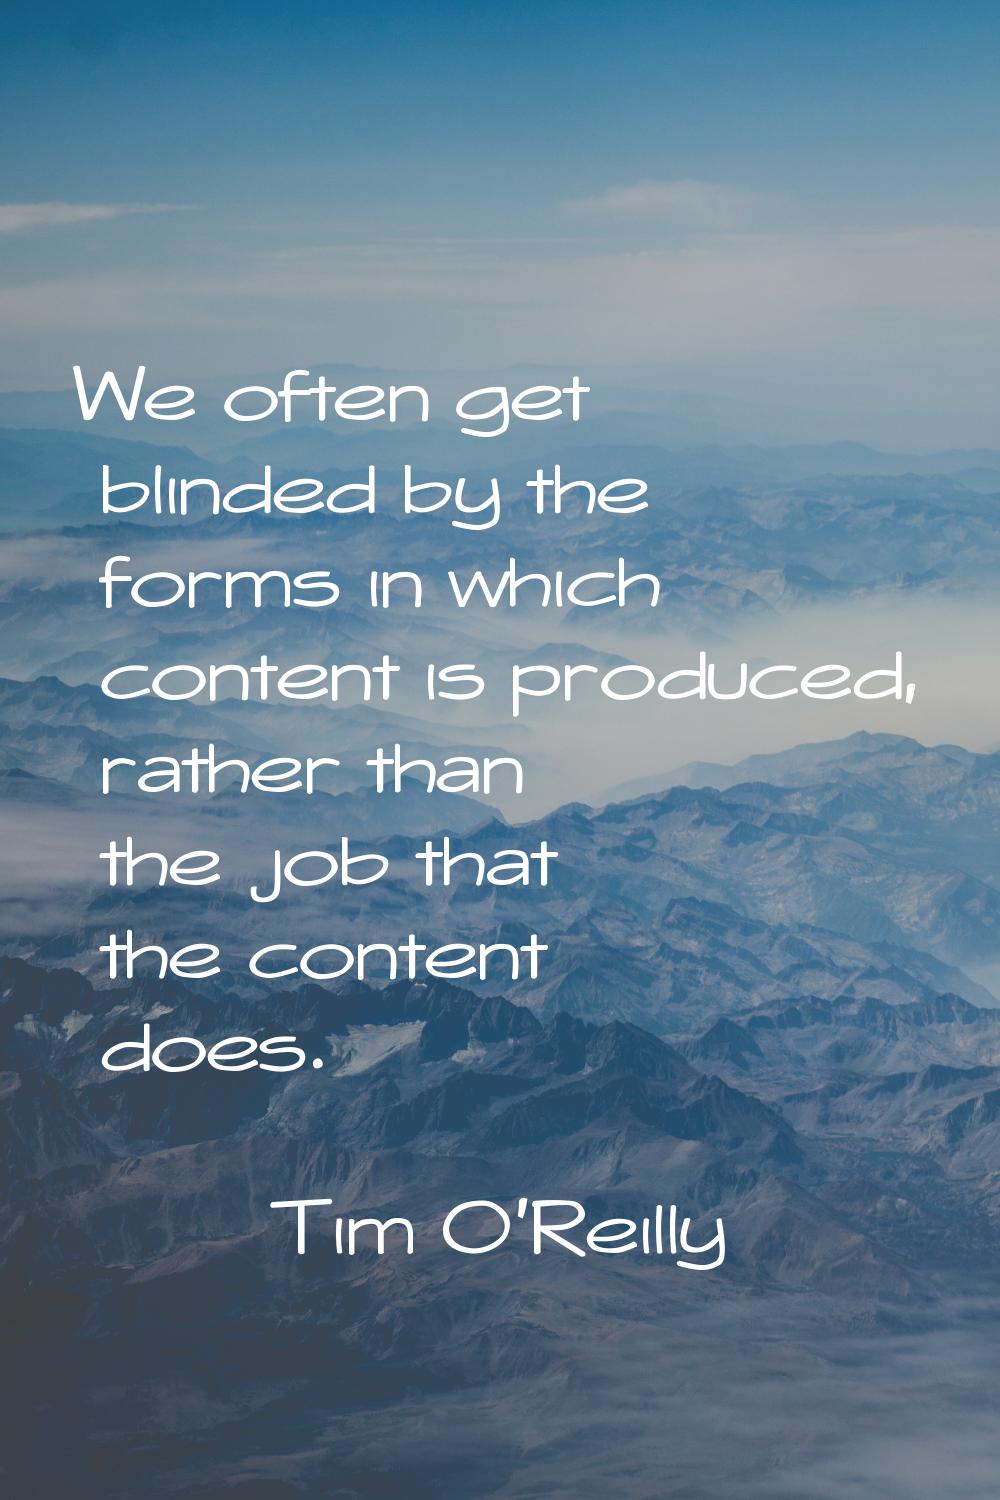 We often get blinded by the forms in which content is produced, rather than the job that the conten